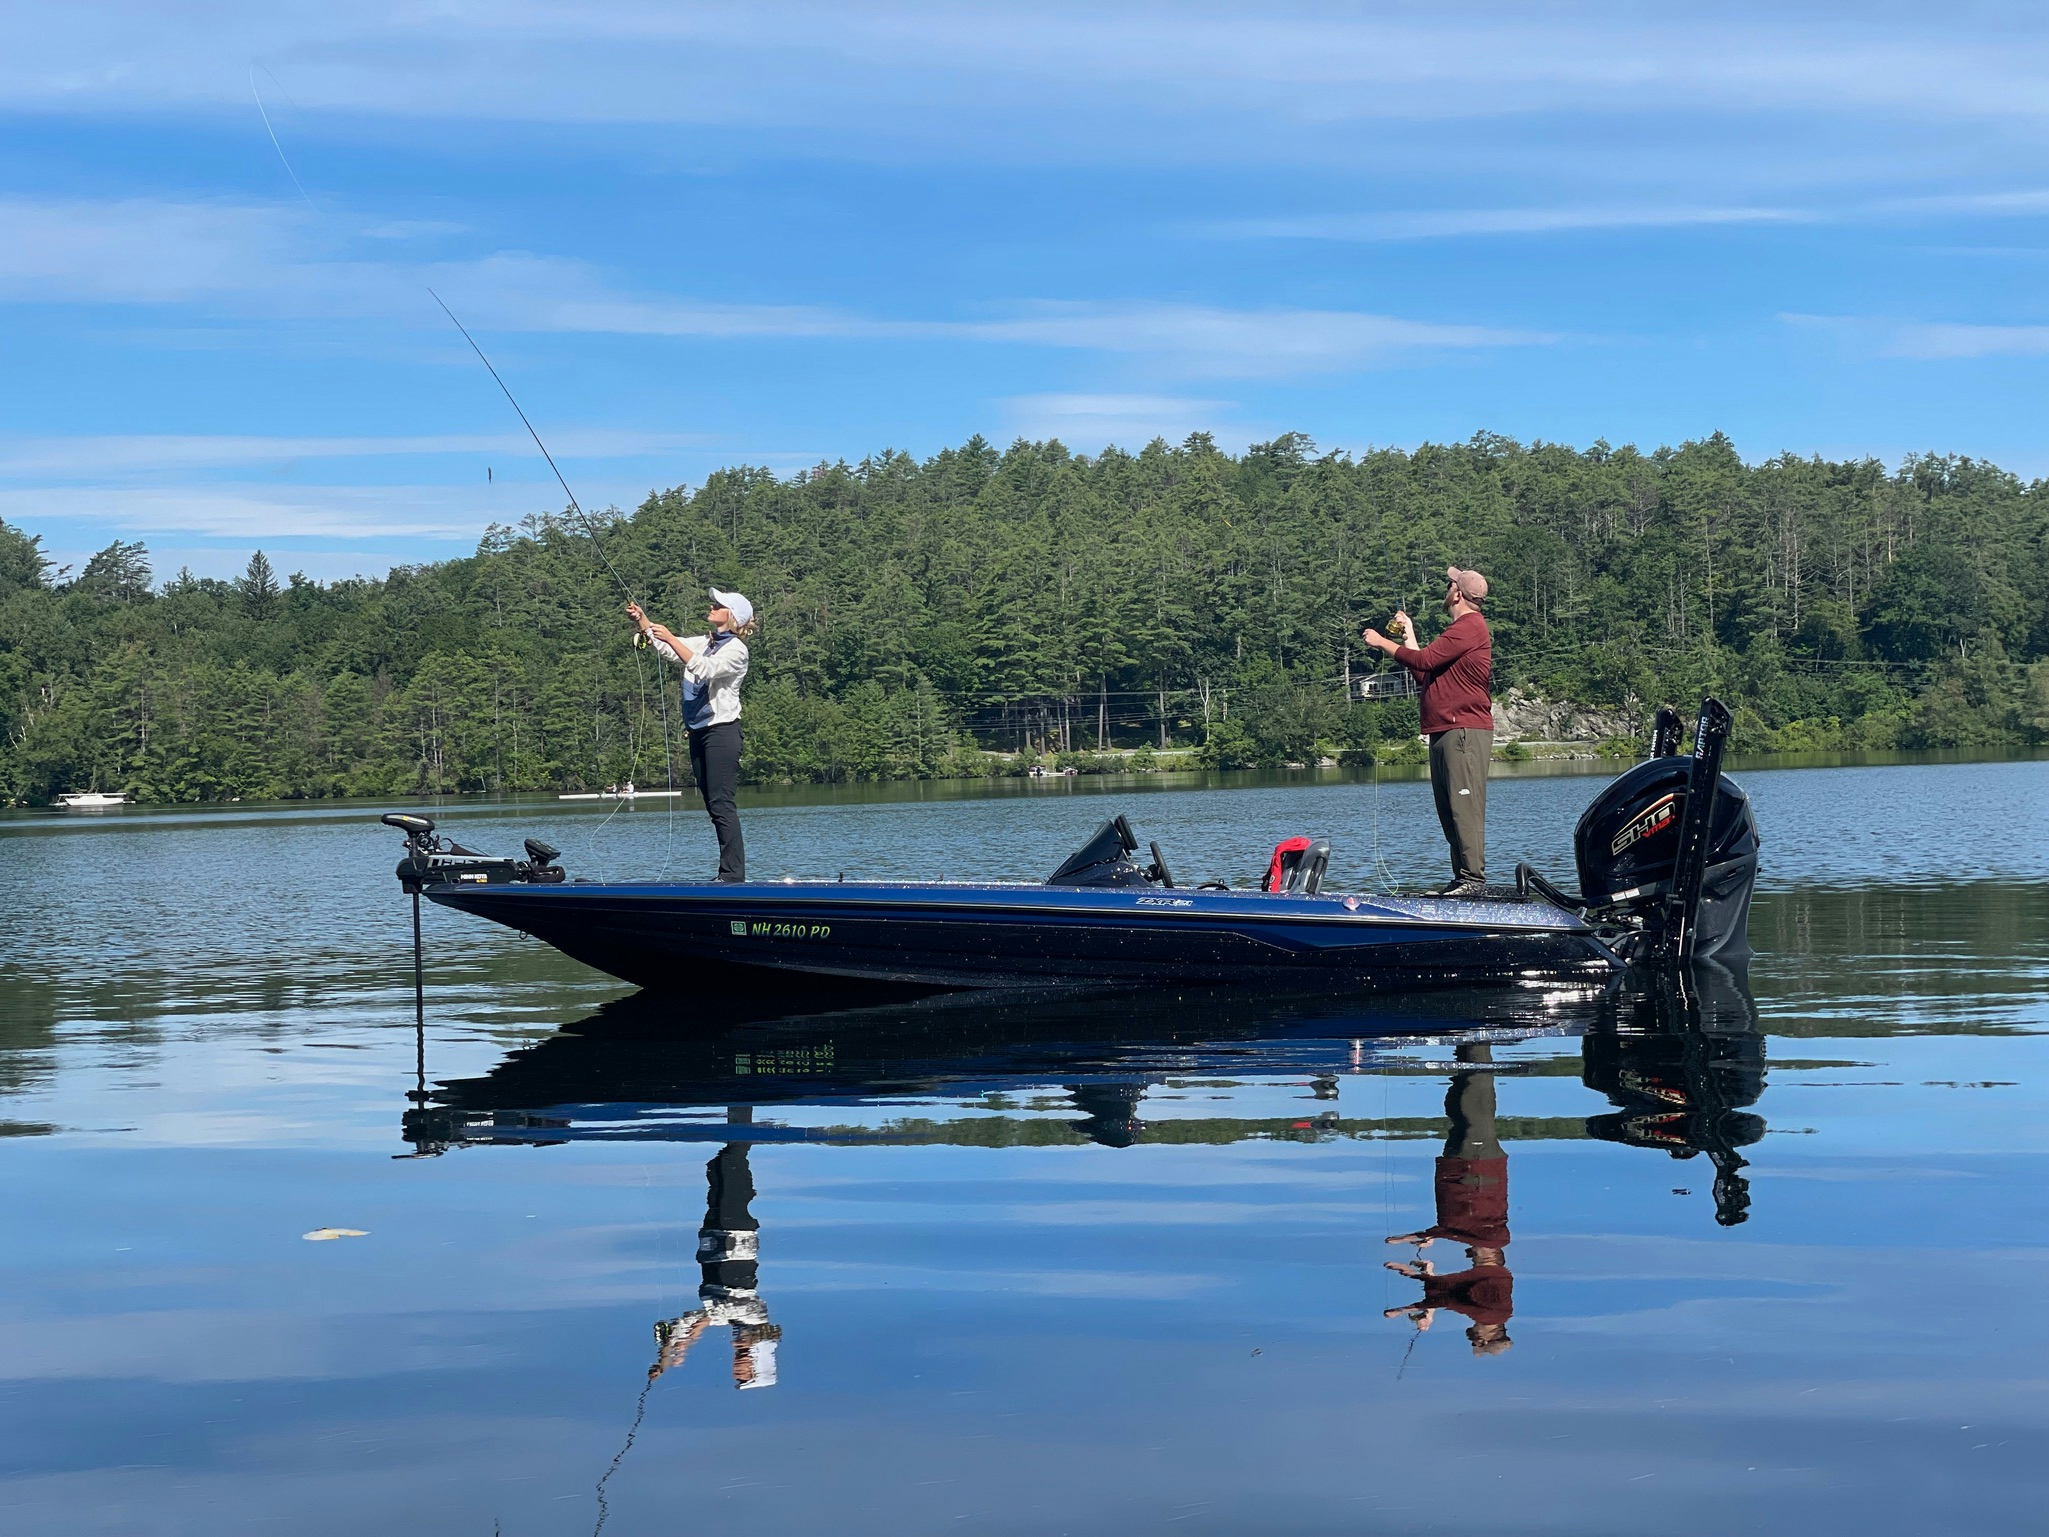 Man in red shirt and woman in white jacket and blank pants fly fishing on blue boat